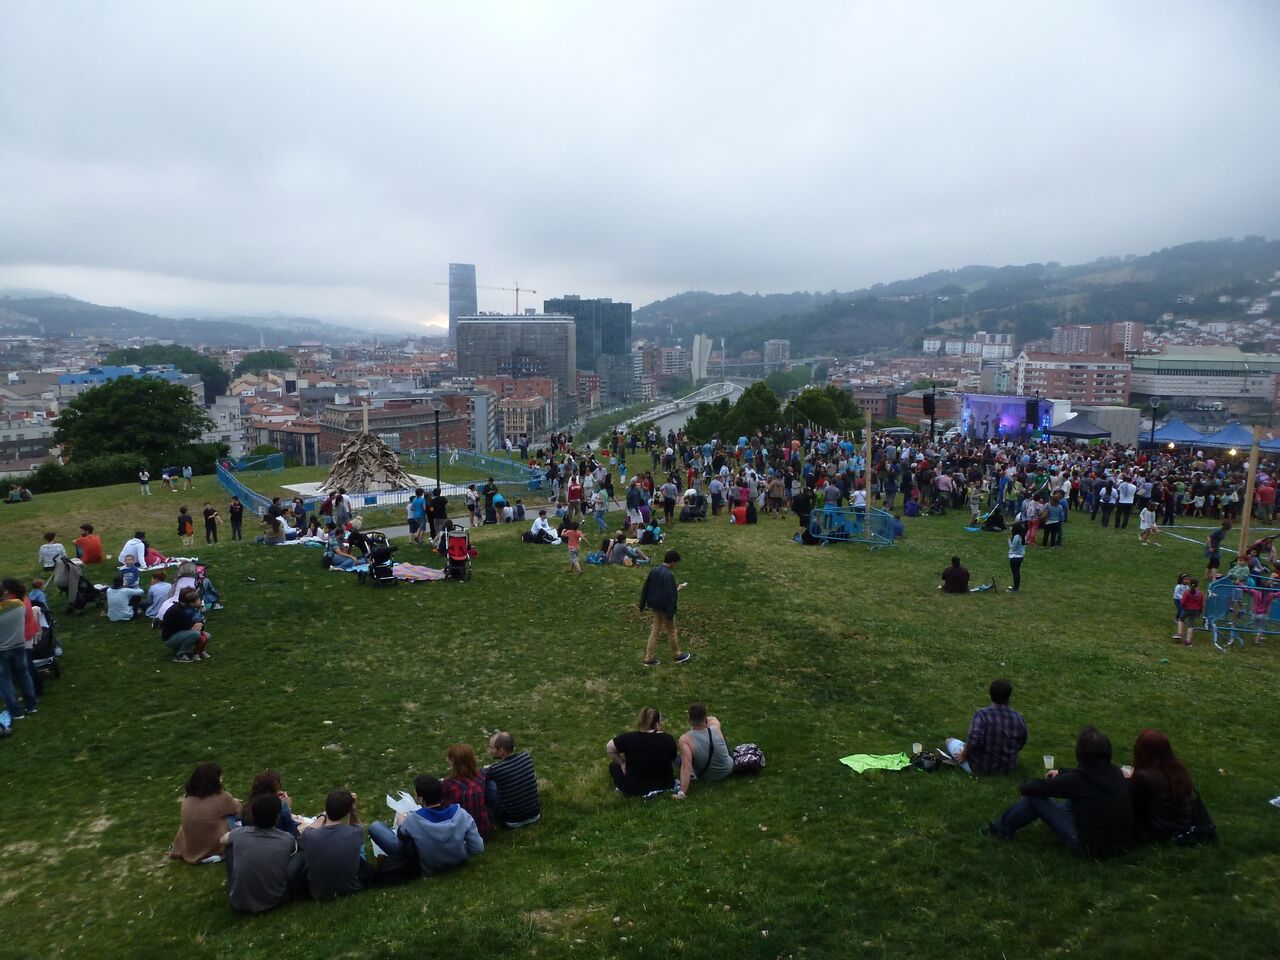 Extebarria as it is now, a thriving green space where community members await the annual Night of San Juan bonfire. Photo credit: Guananí Gómez